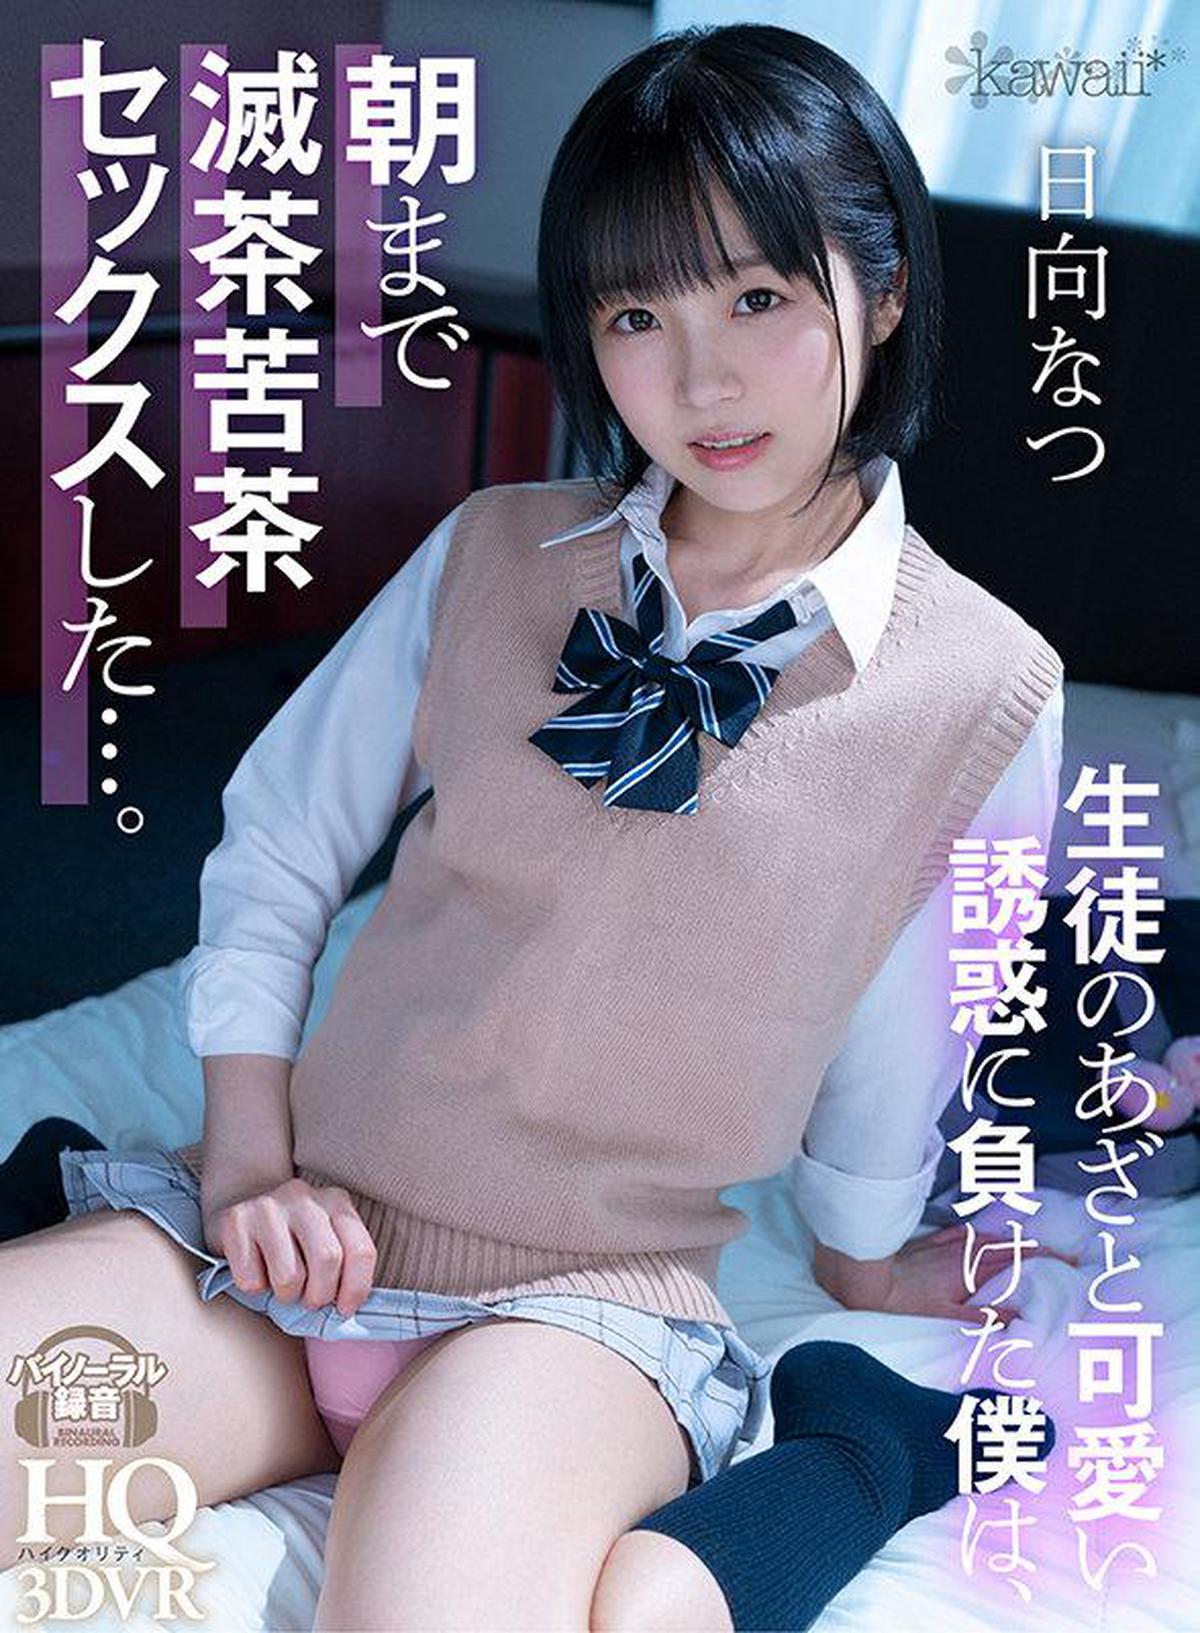 KAVR-204 [VR] I lost the student's bruise and cute temptation, and I had messed up sex until morning ... Natsu Hinata